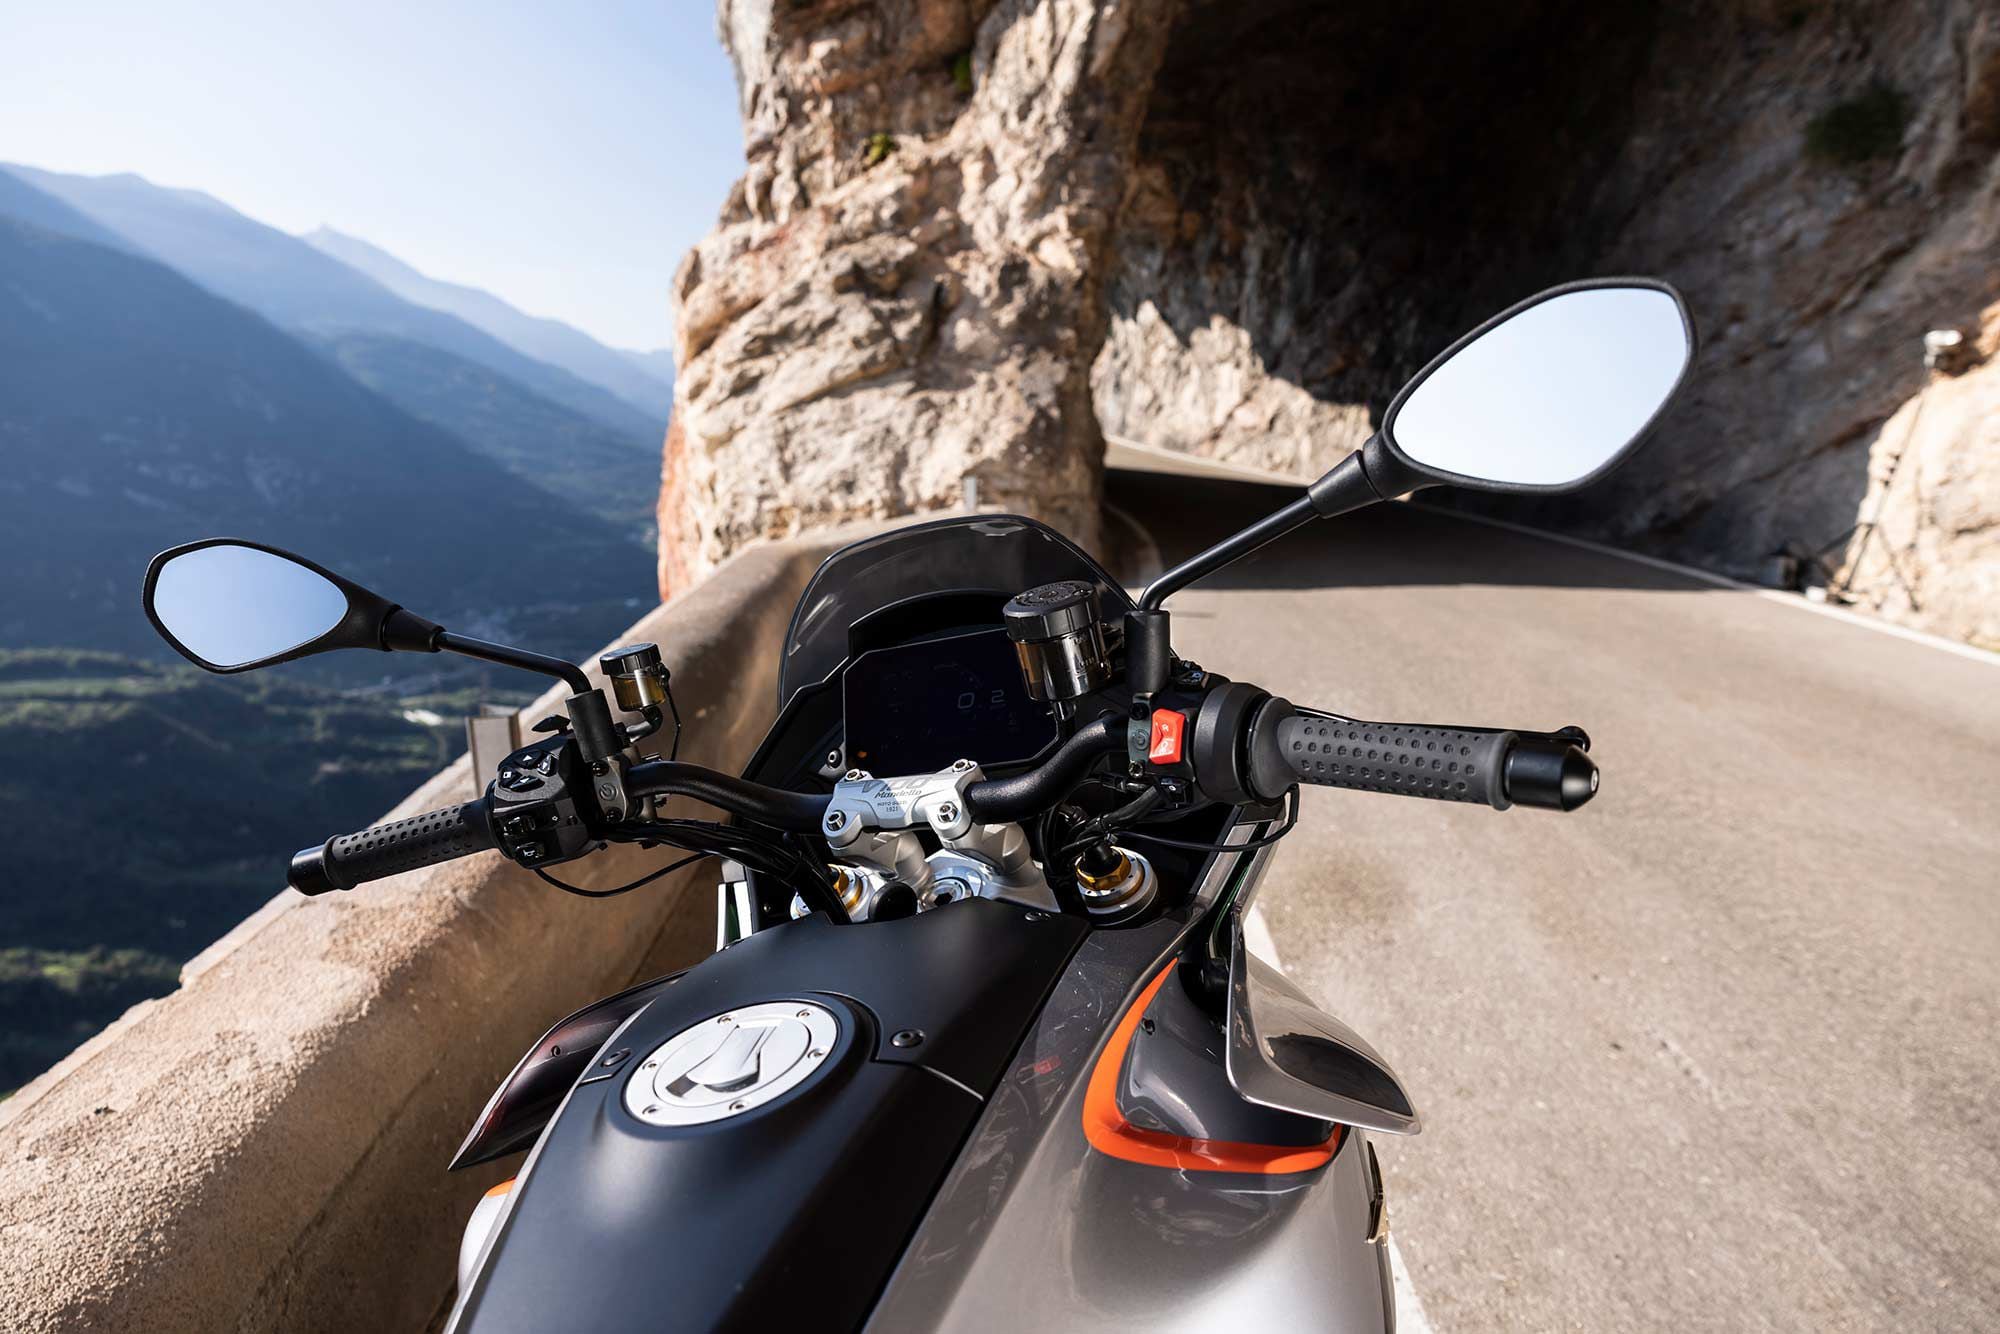 The Moto Guzzi V100 Mandello S features a well-proportioned cockpit that will be appreciated by riders of any size.